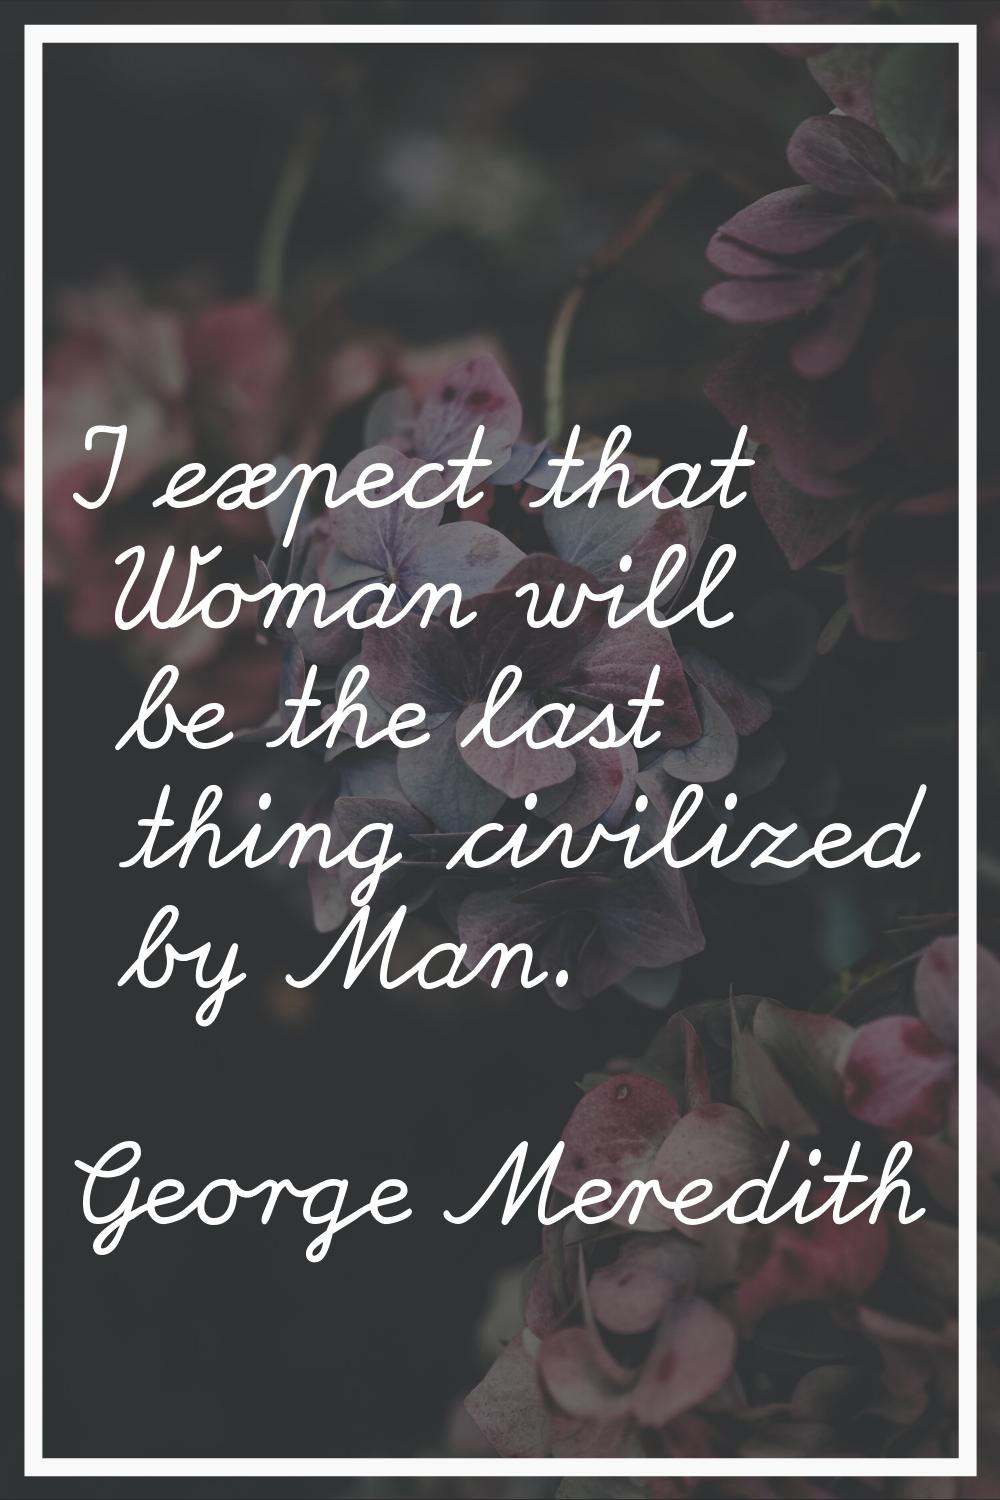 I expect that Woman will be the last thing civilized by Man.